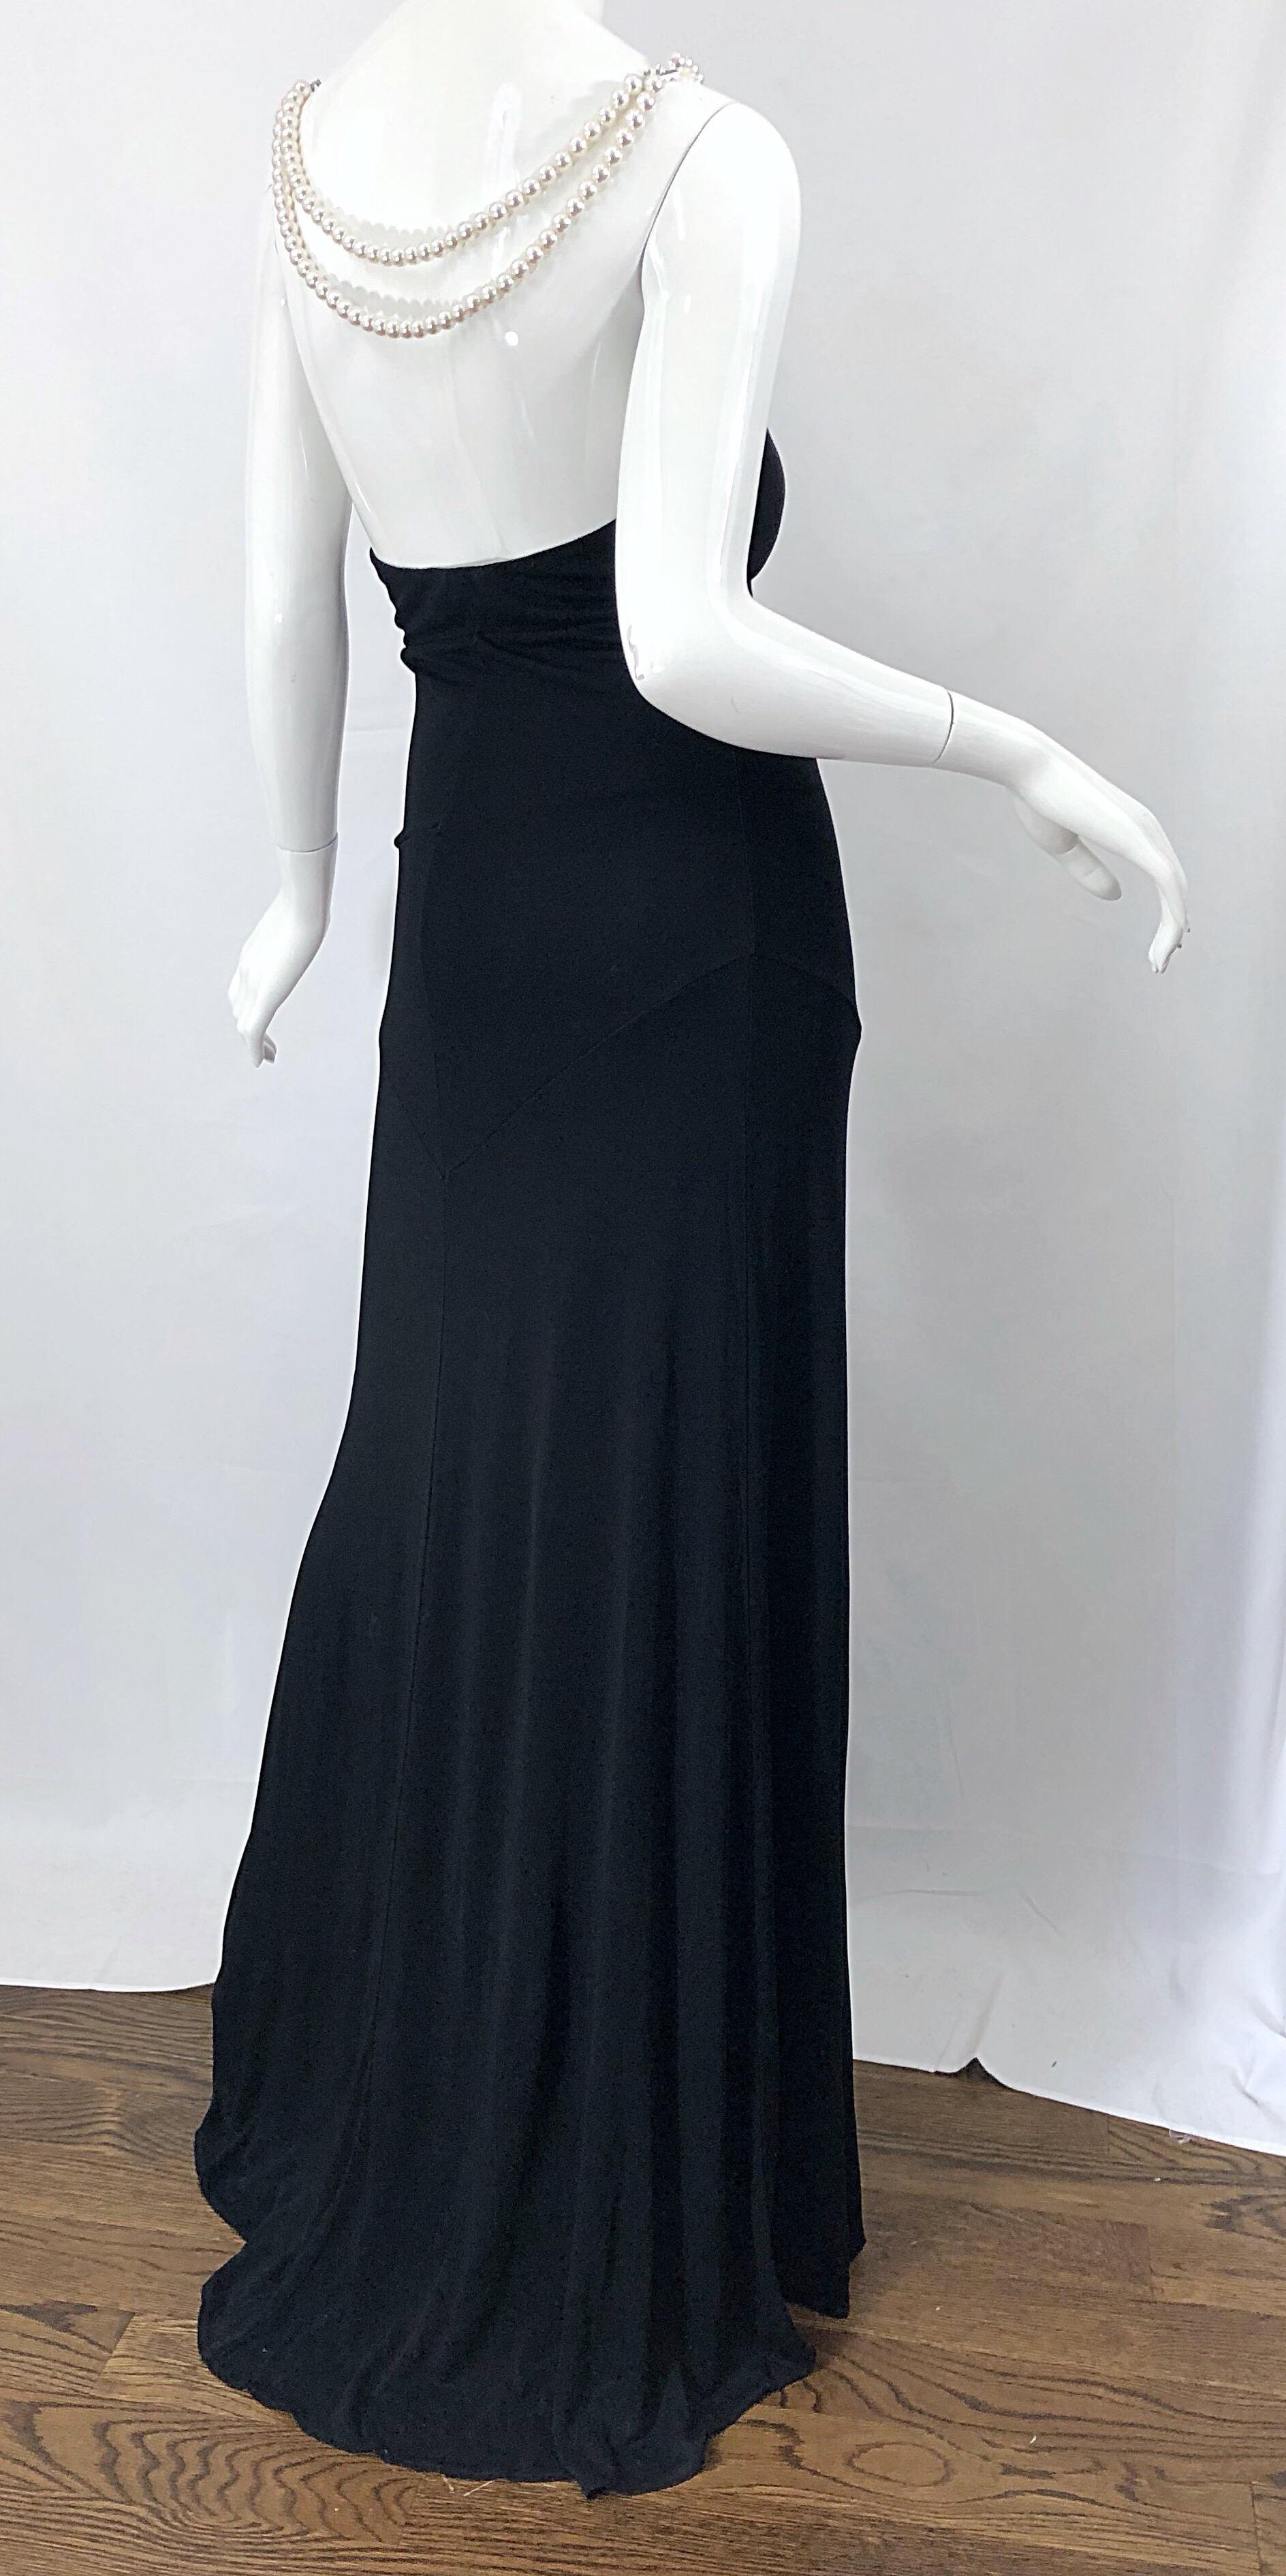 Michael Kors Collection Pearl Open Back Size 4 / 6 Black Grecian Gown Dress For Sale 5